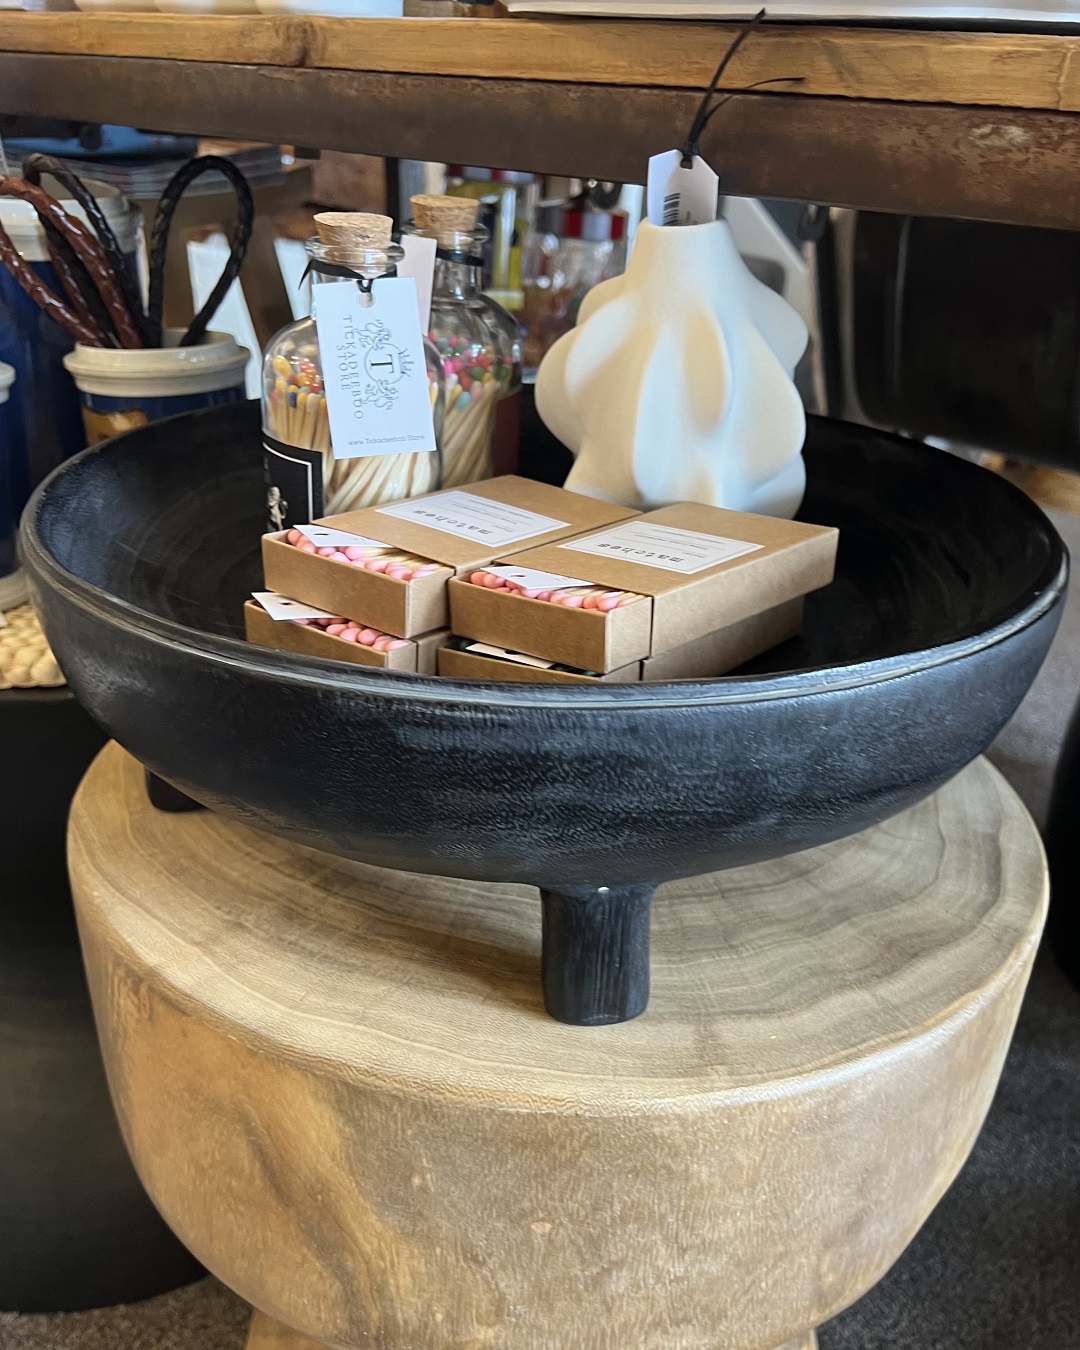 Black wooden bowl with feet